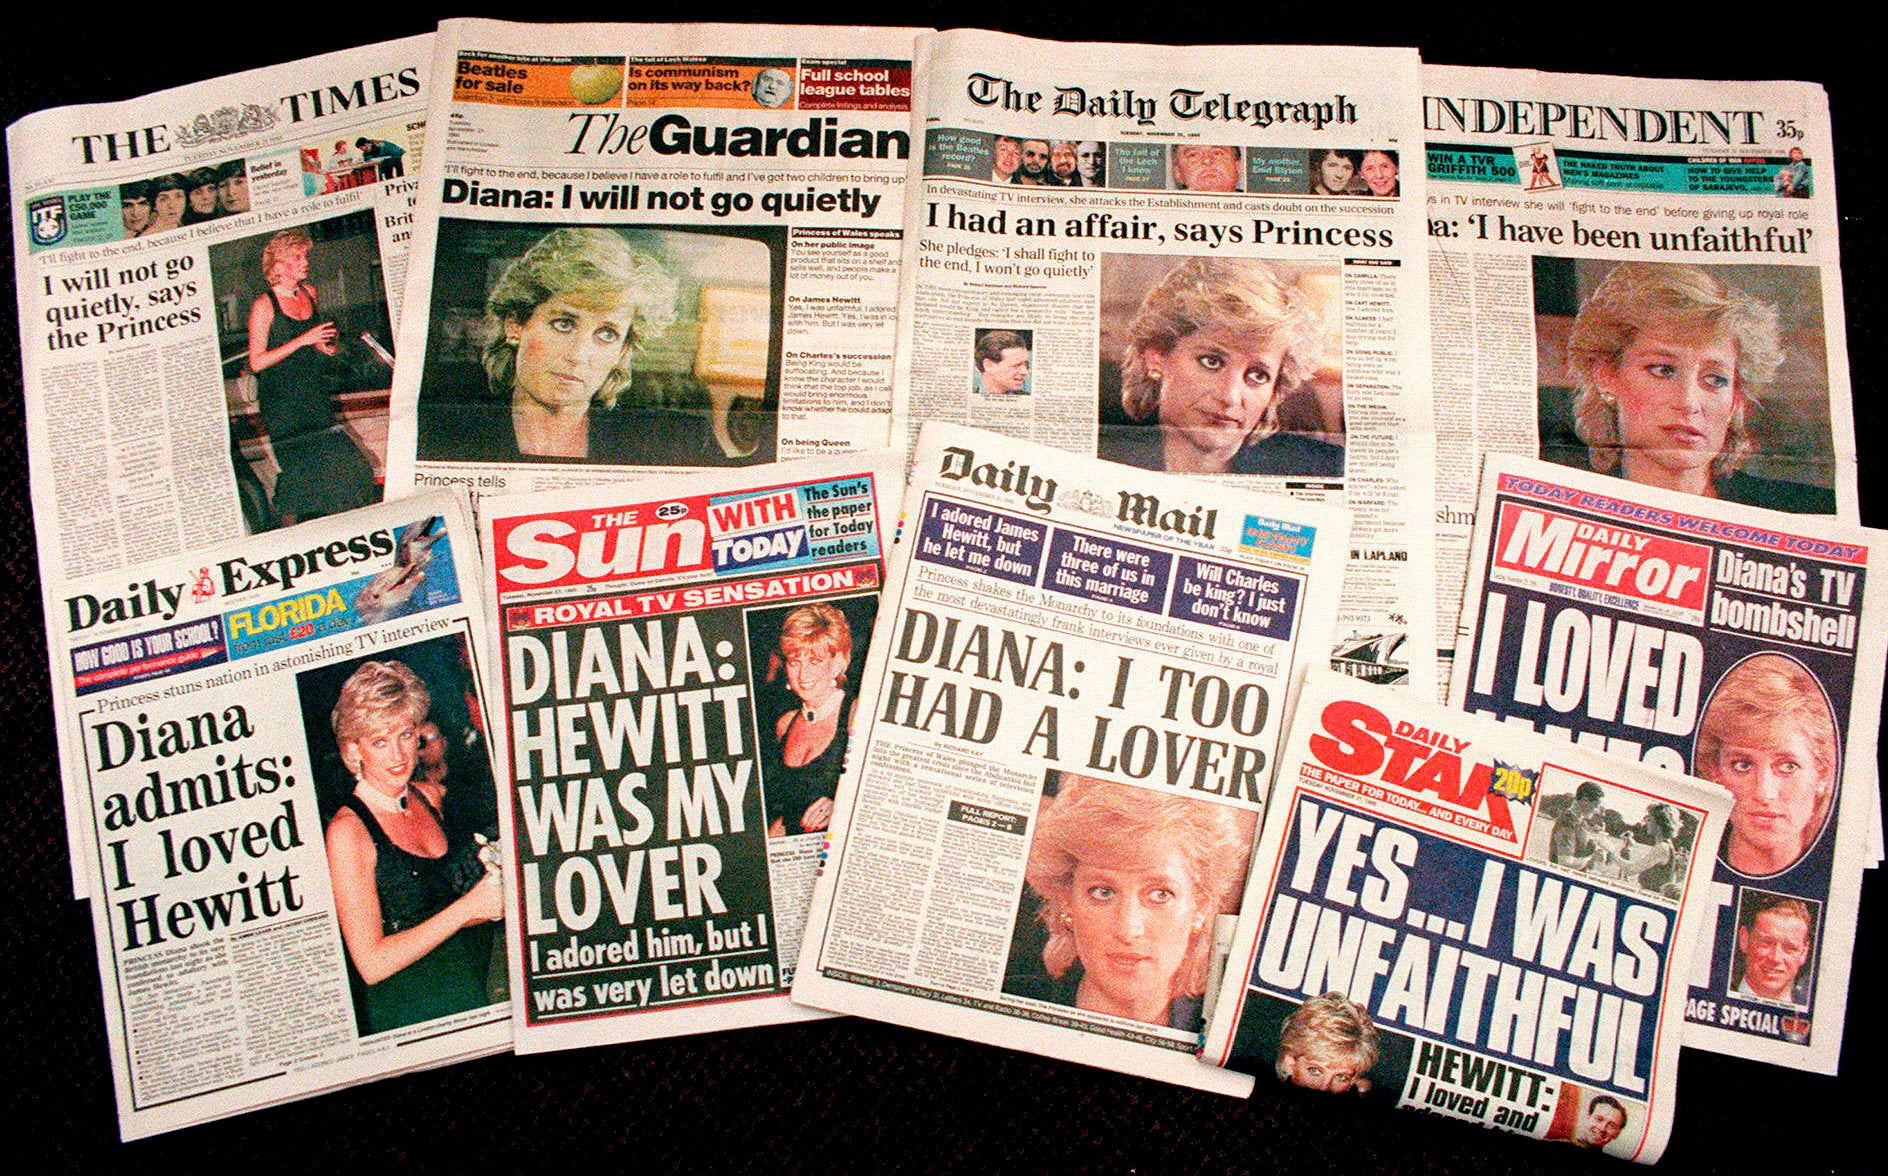 Press reaction to the BBC’s Princess Diana interview in 1995